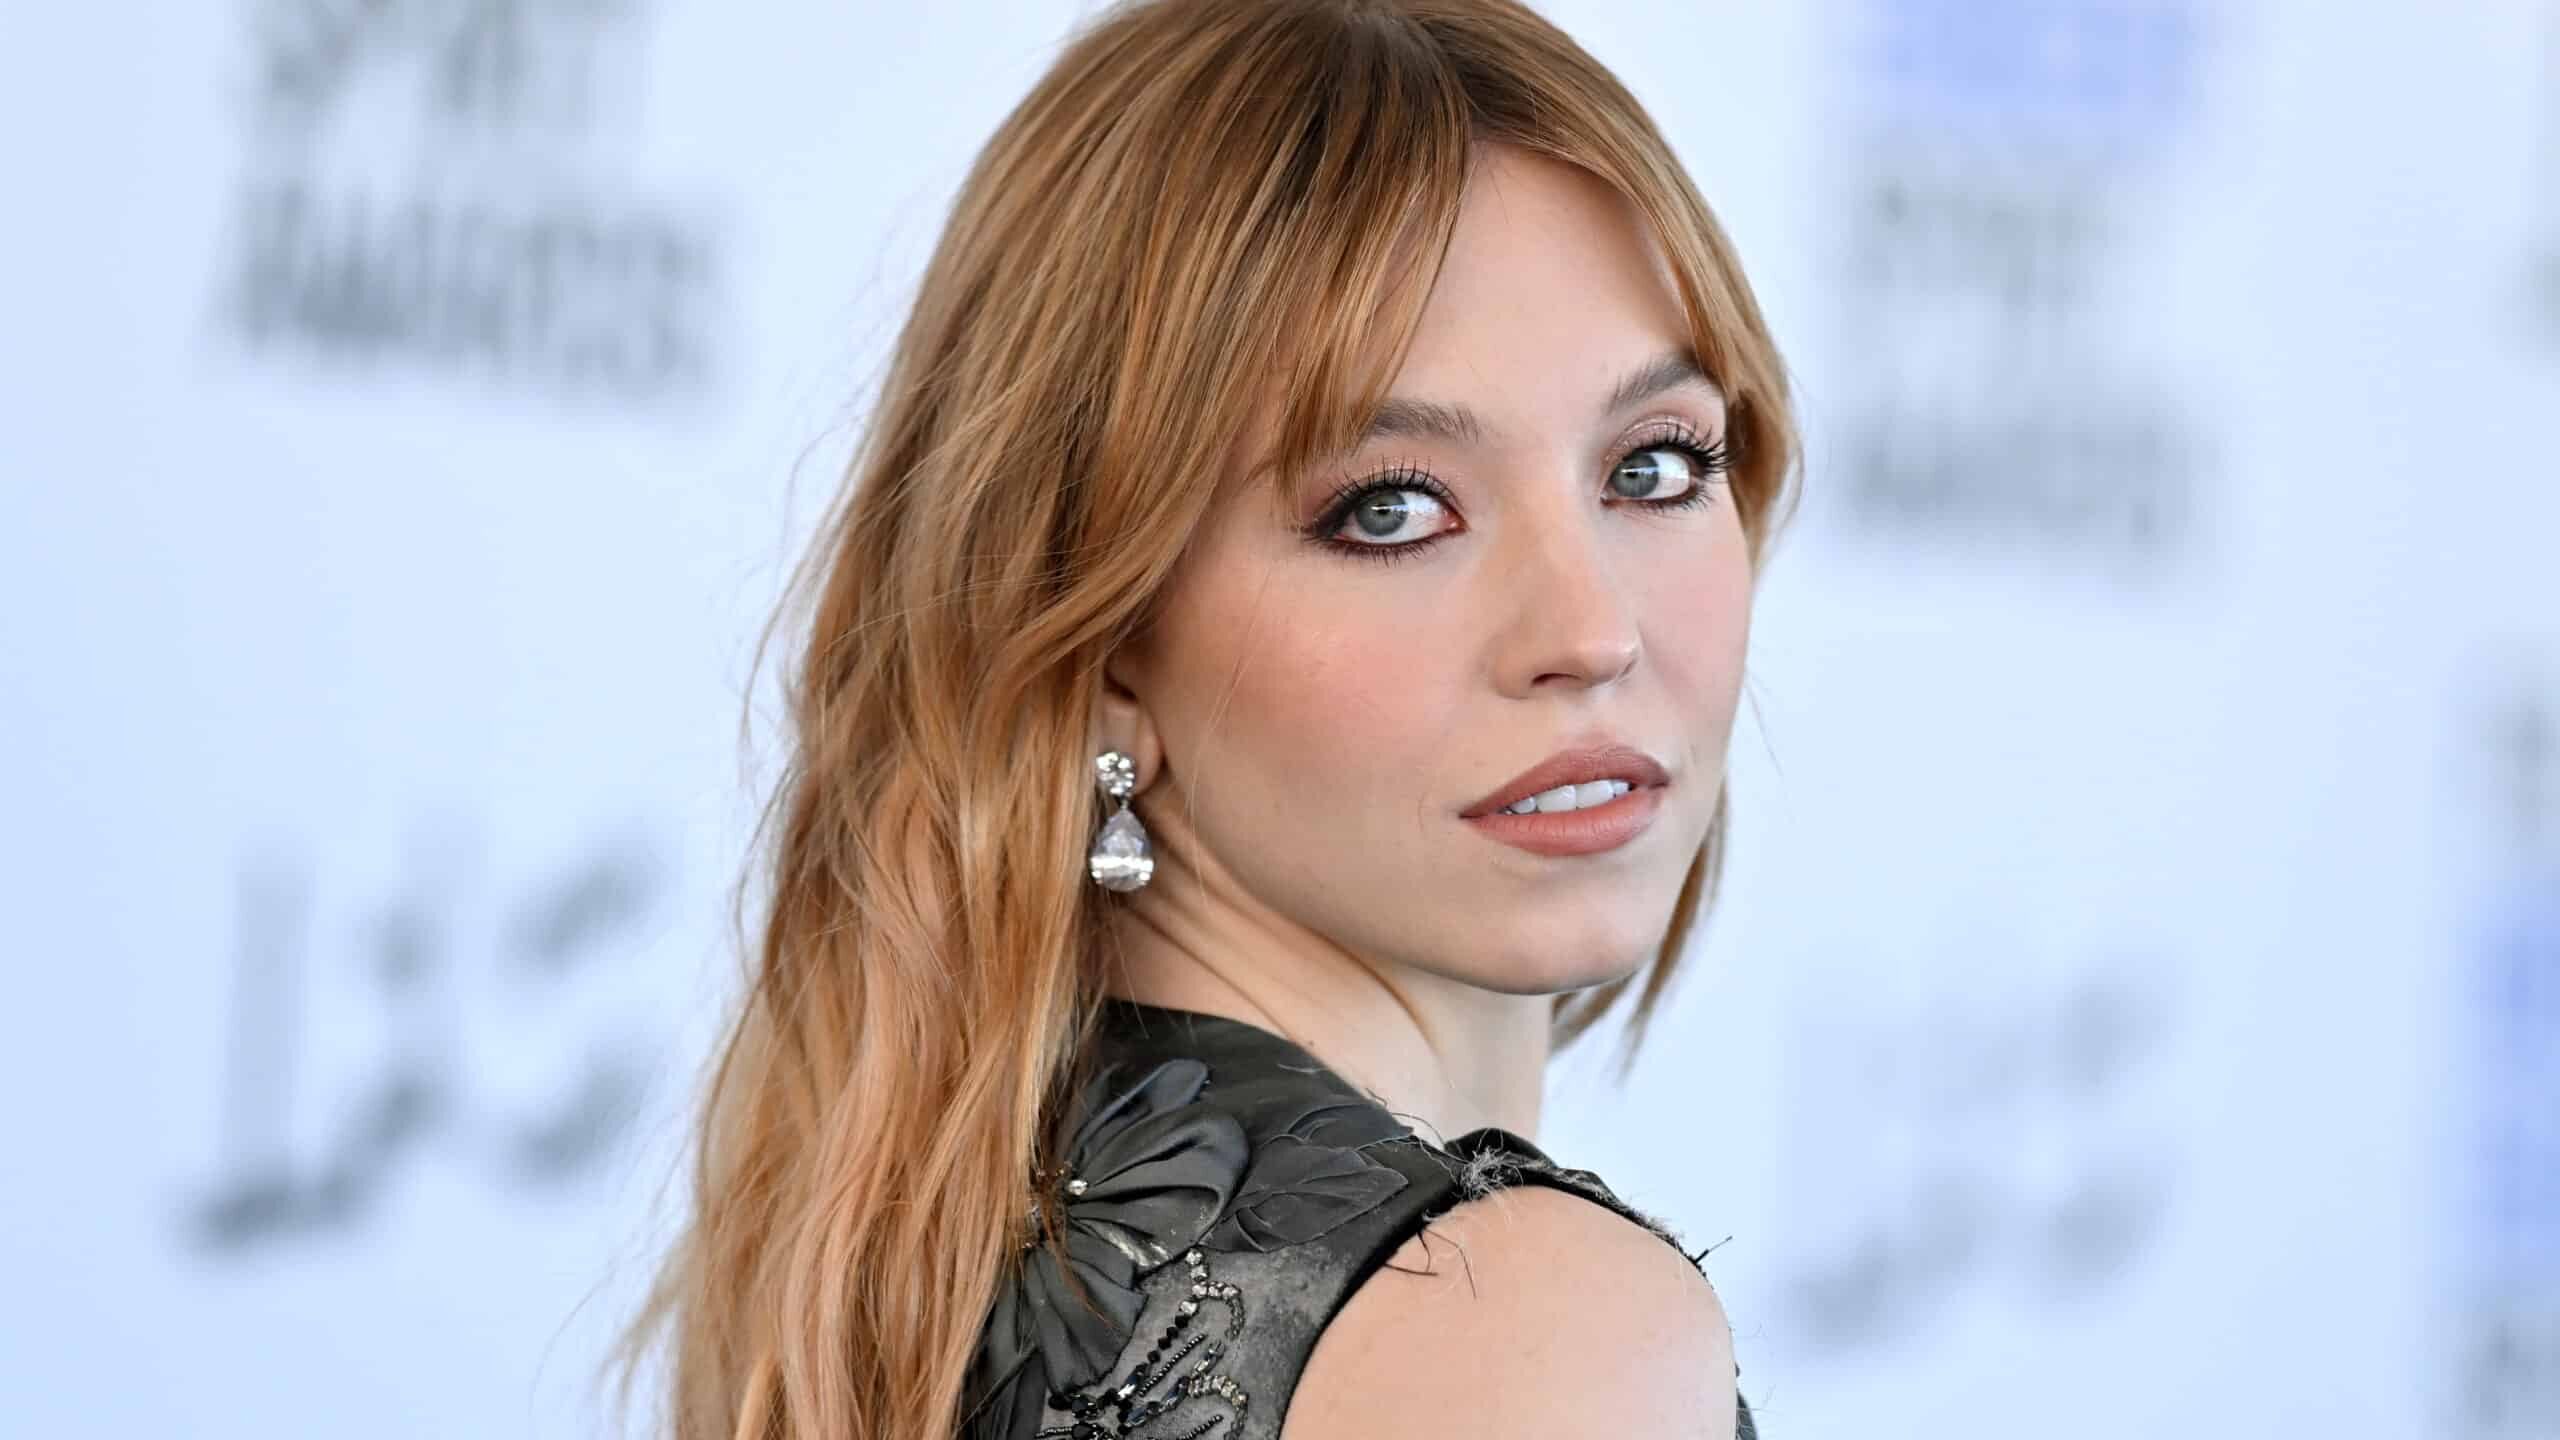 SANTA MONICA, CALIFORNIA - MARCH 06: Sydney Sweeney attends the 2022 Film Independent Spirit Awards on March 06, 2022 in Santa Monica, California.